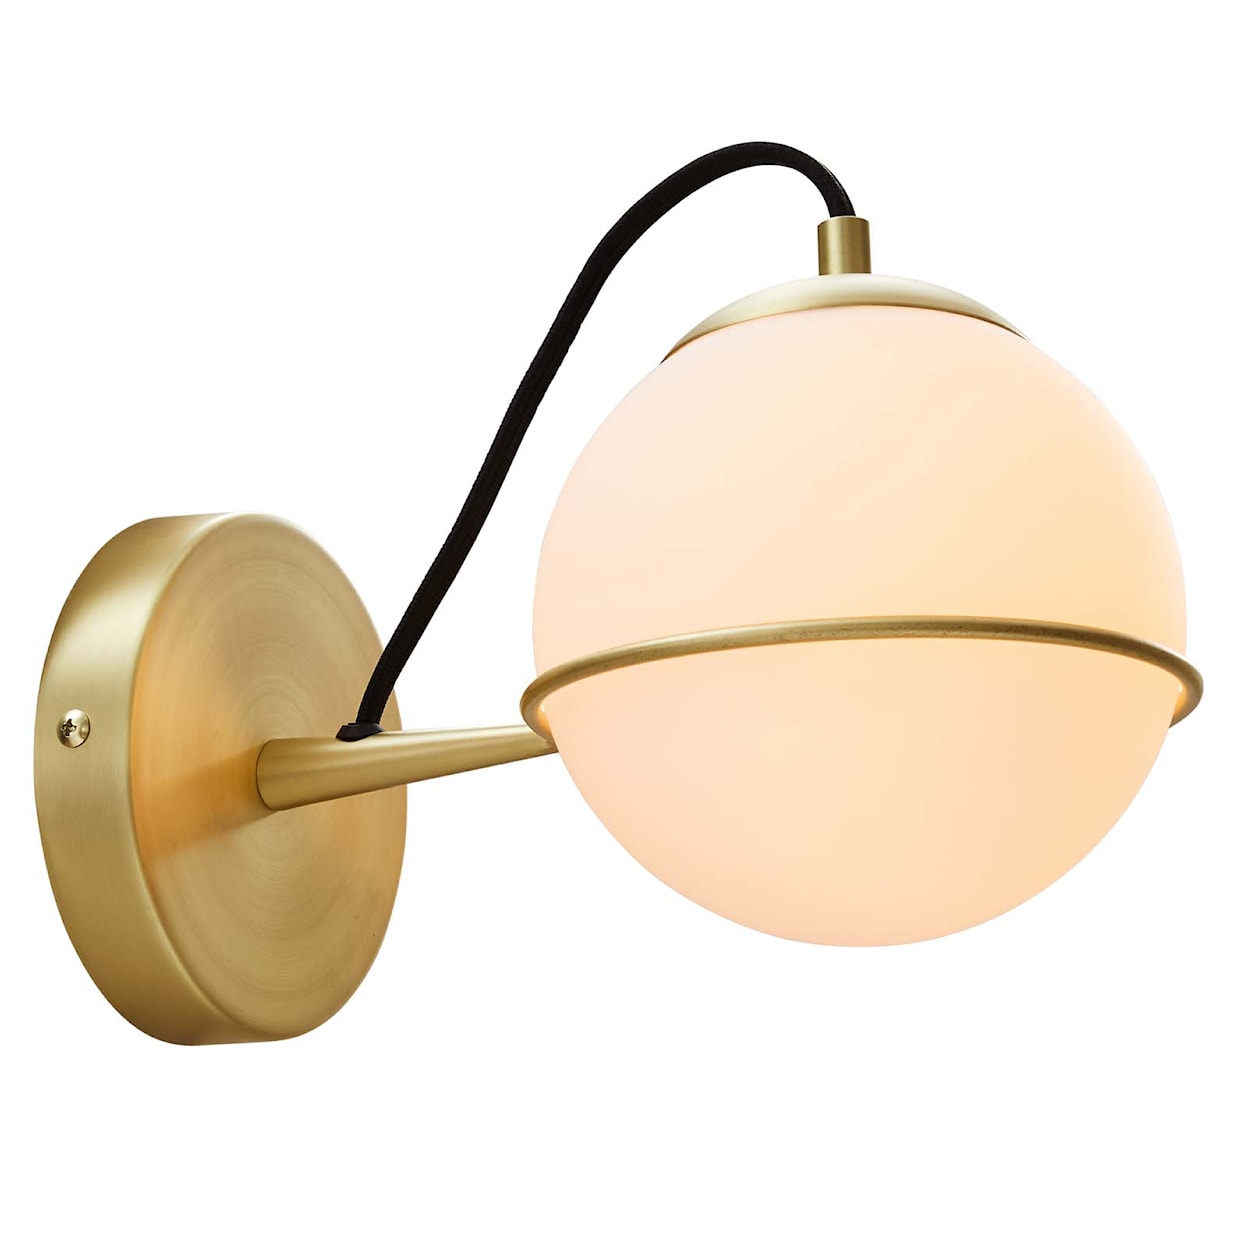 Modway Hanna Hardwire Wall Sconce